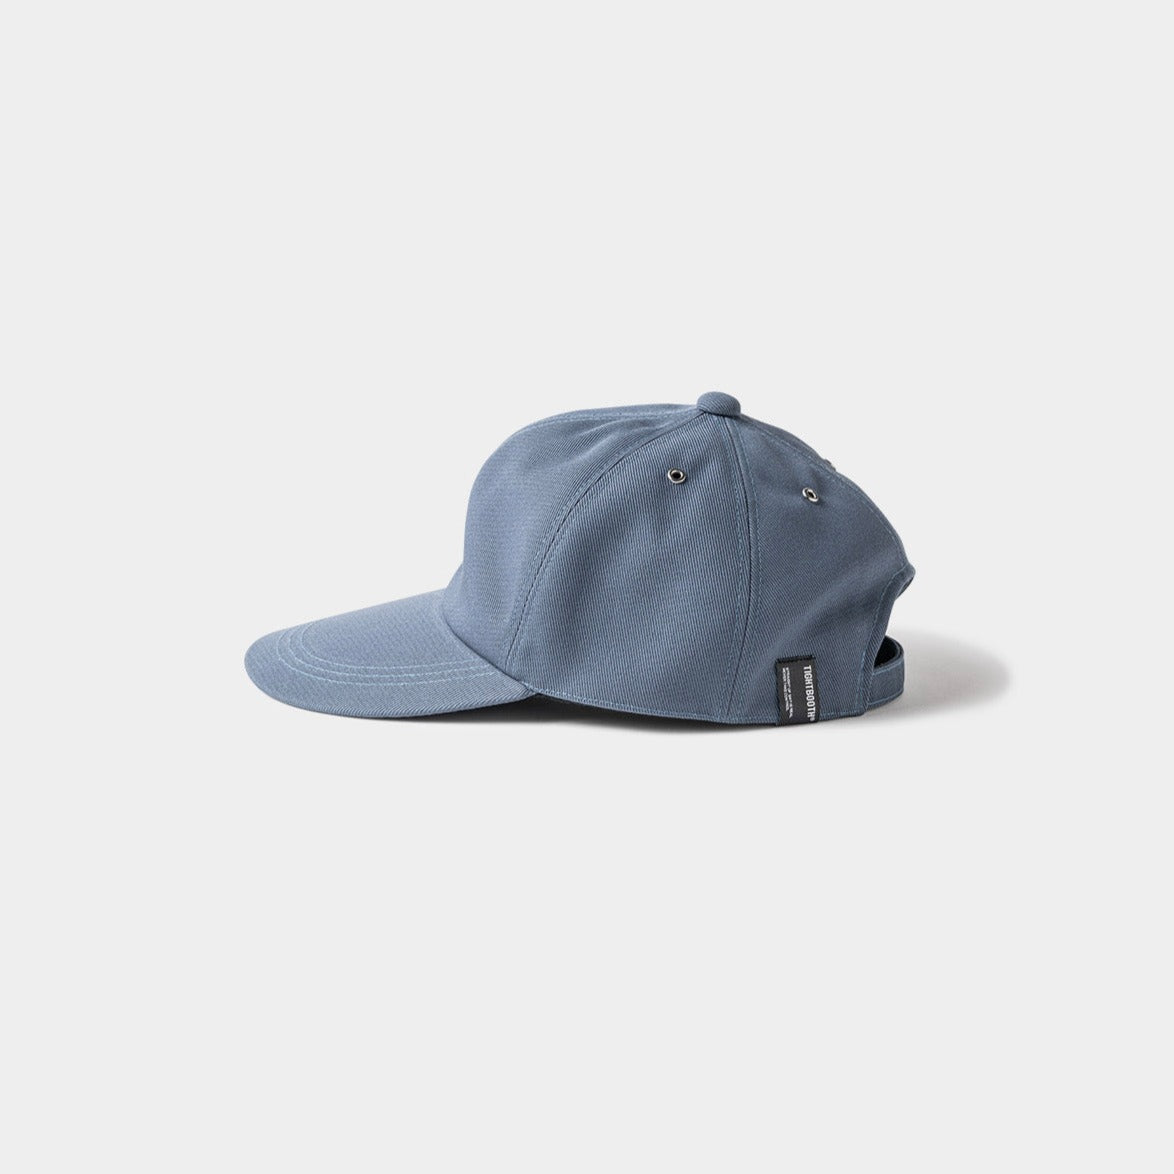 TWILL KOKO CAP – Why are you here?